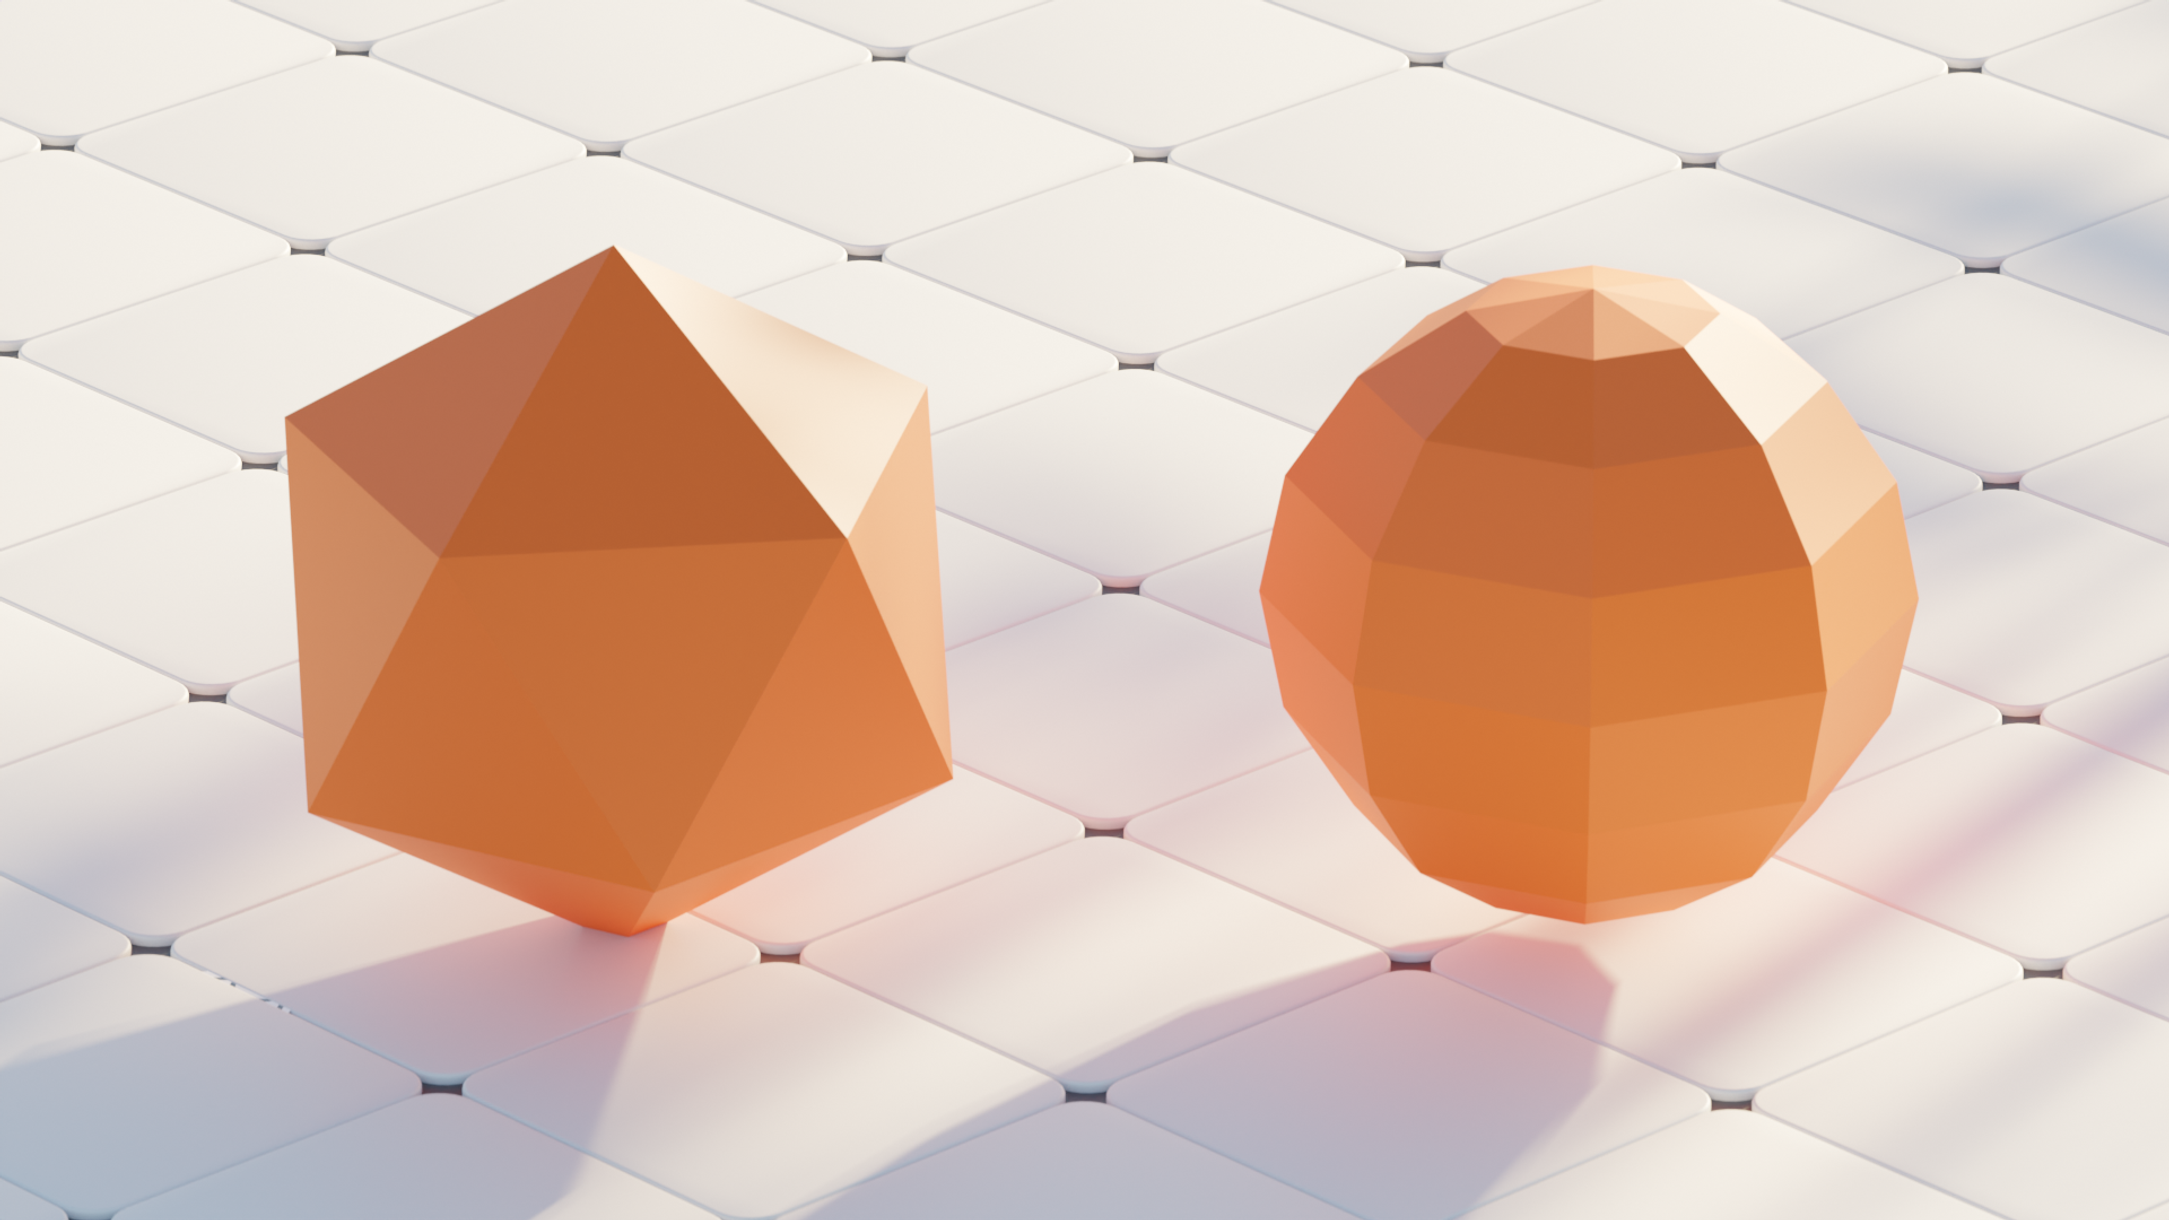 A render of two slightly different spheres